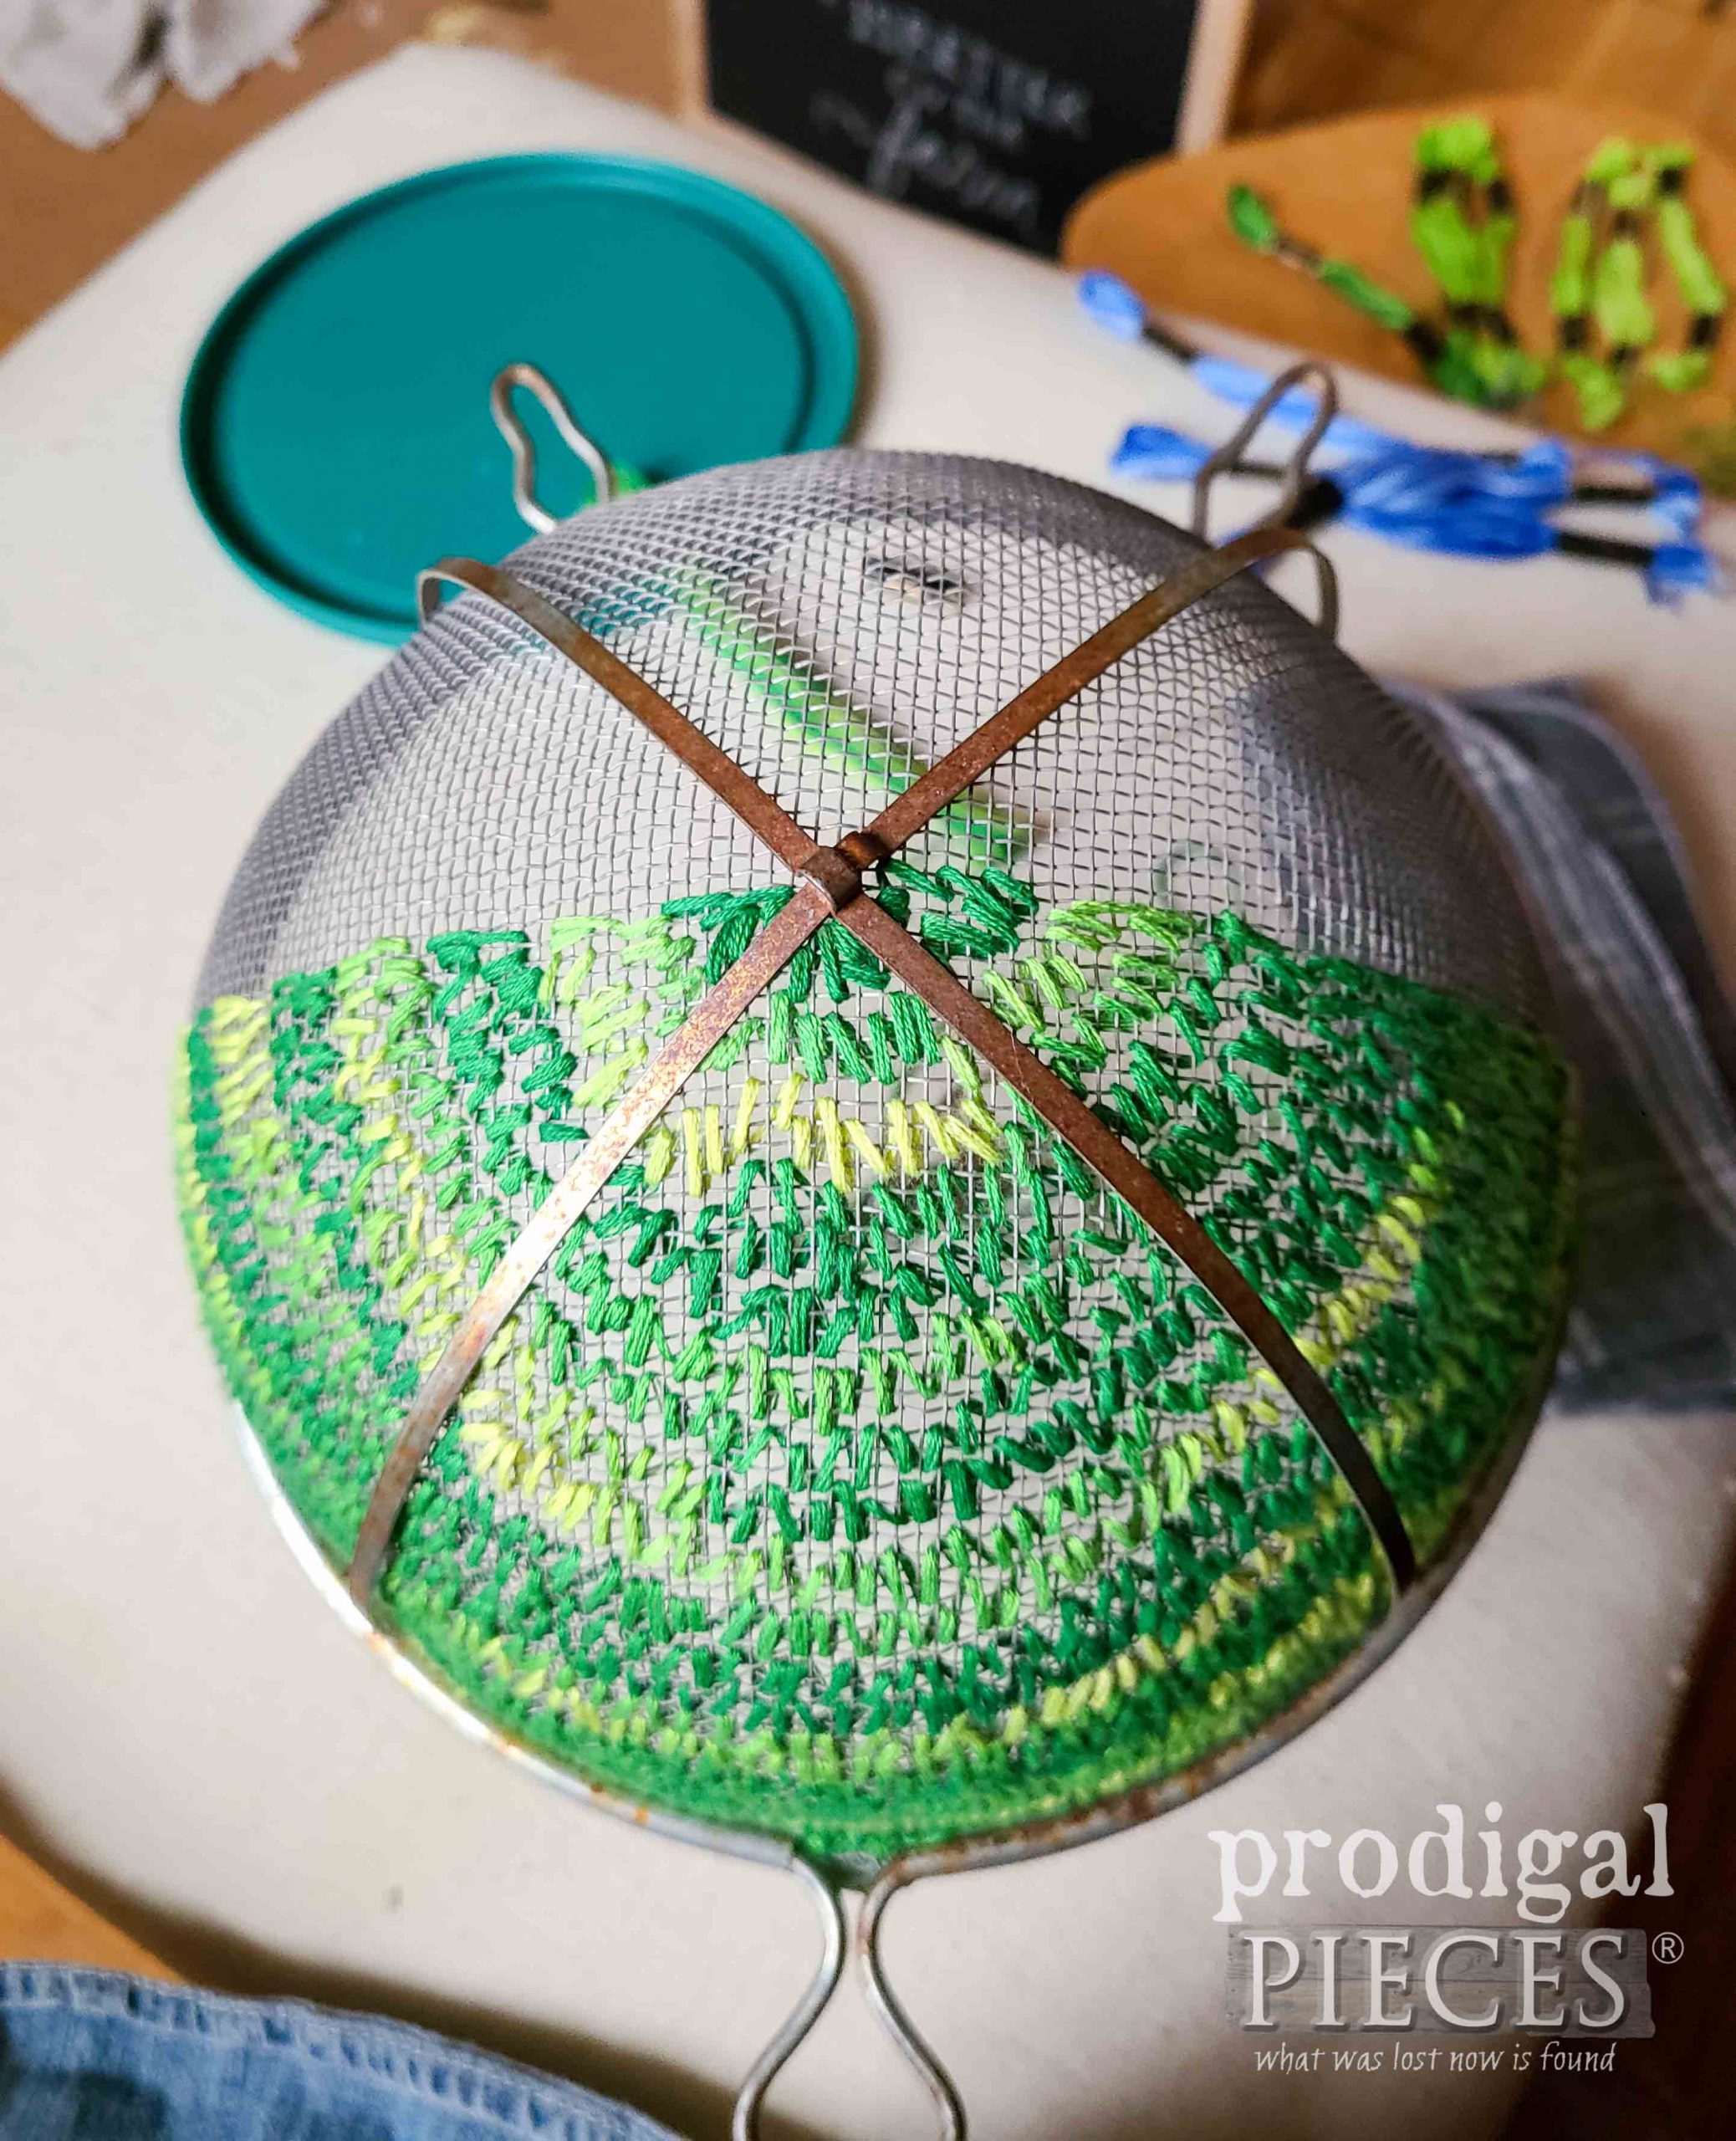 Variegated Grass Embroidery on Strainer | prodigalpieces.com #prodigalpieces